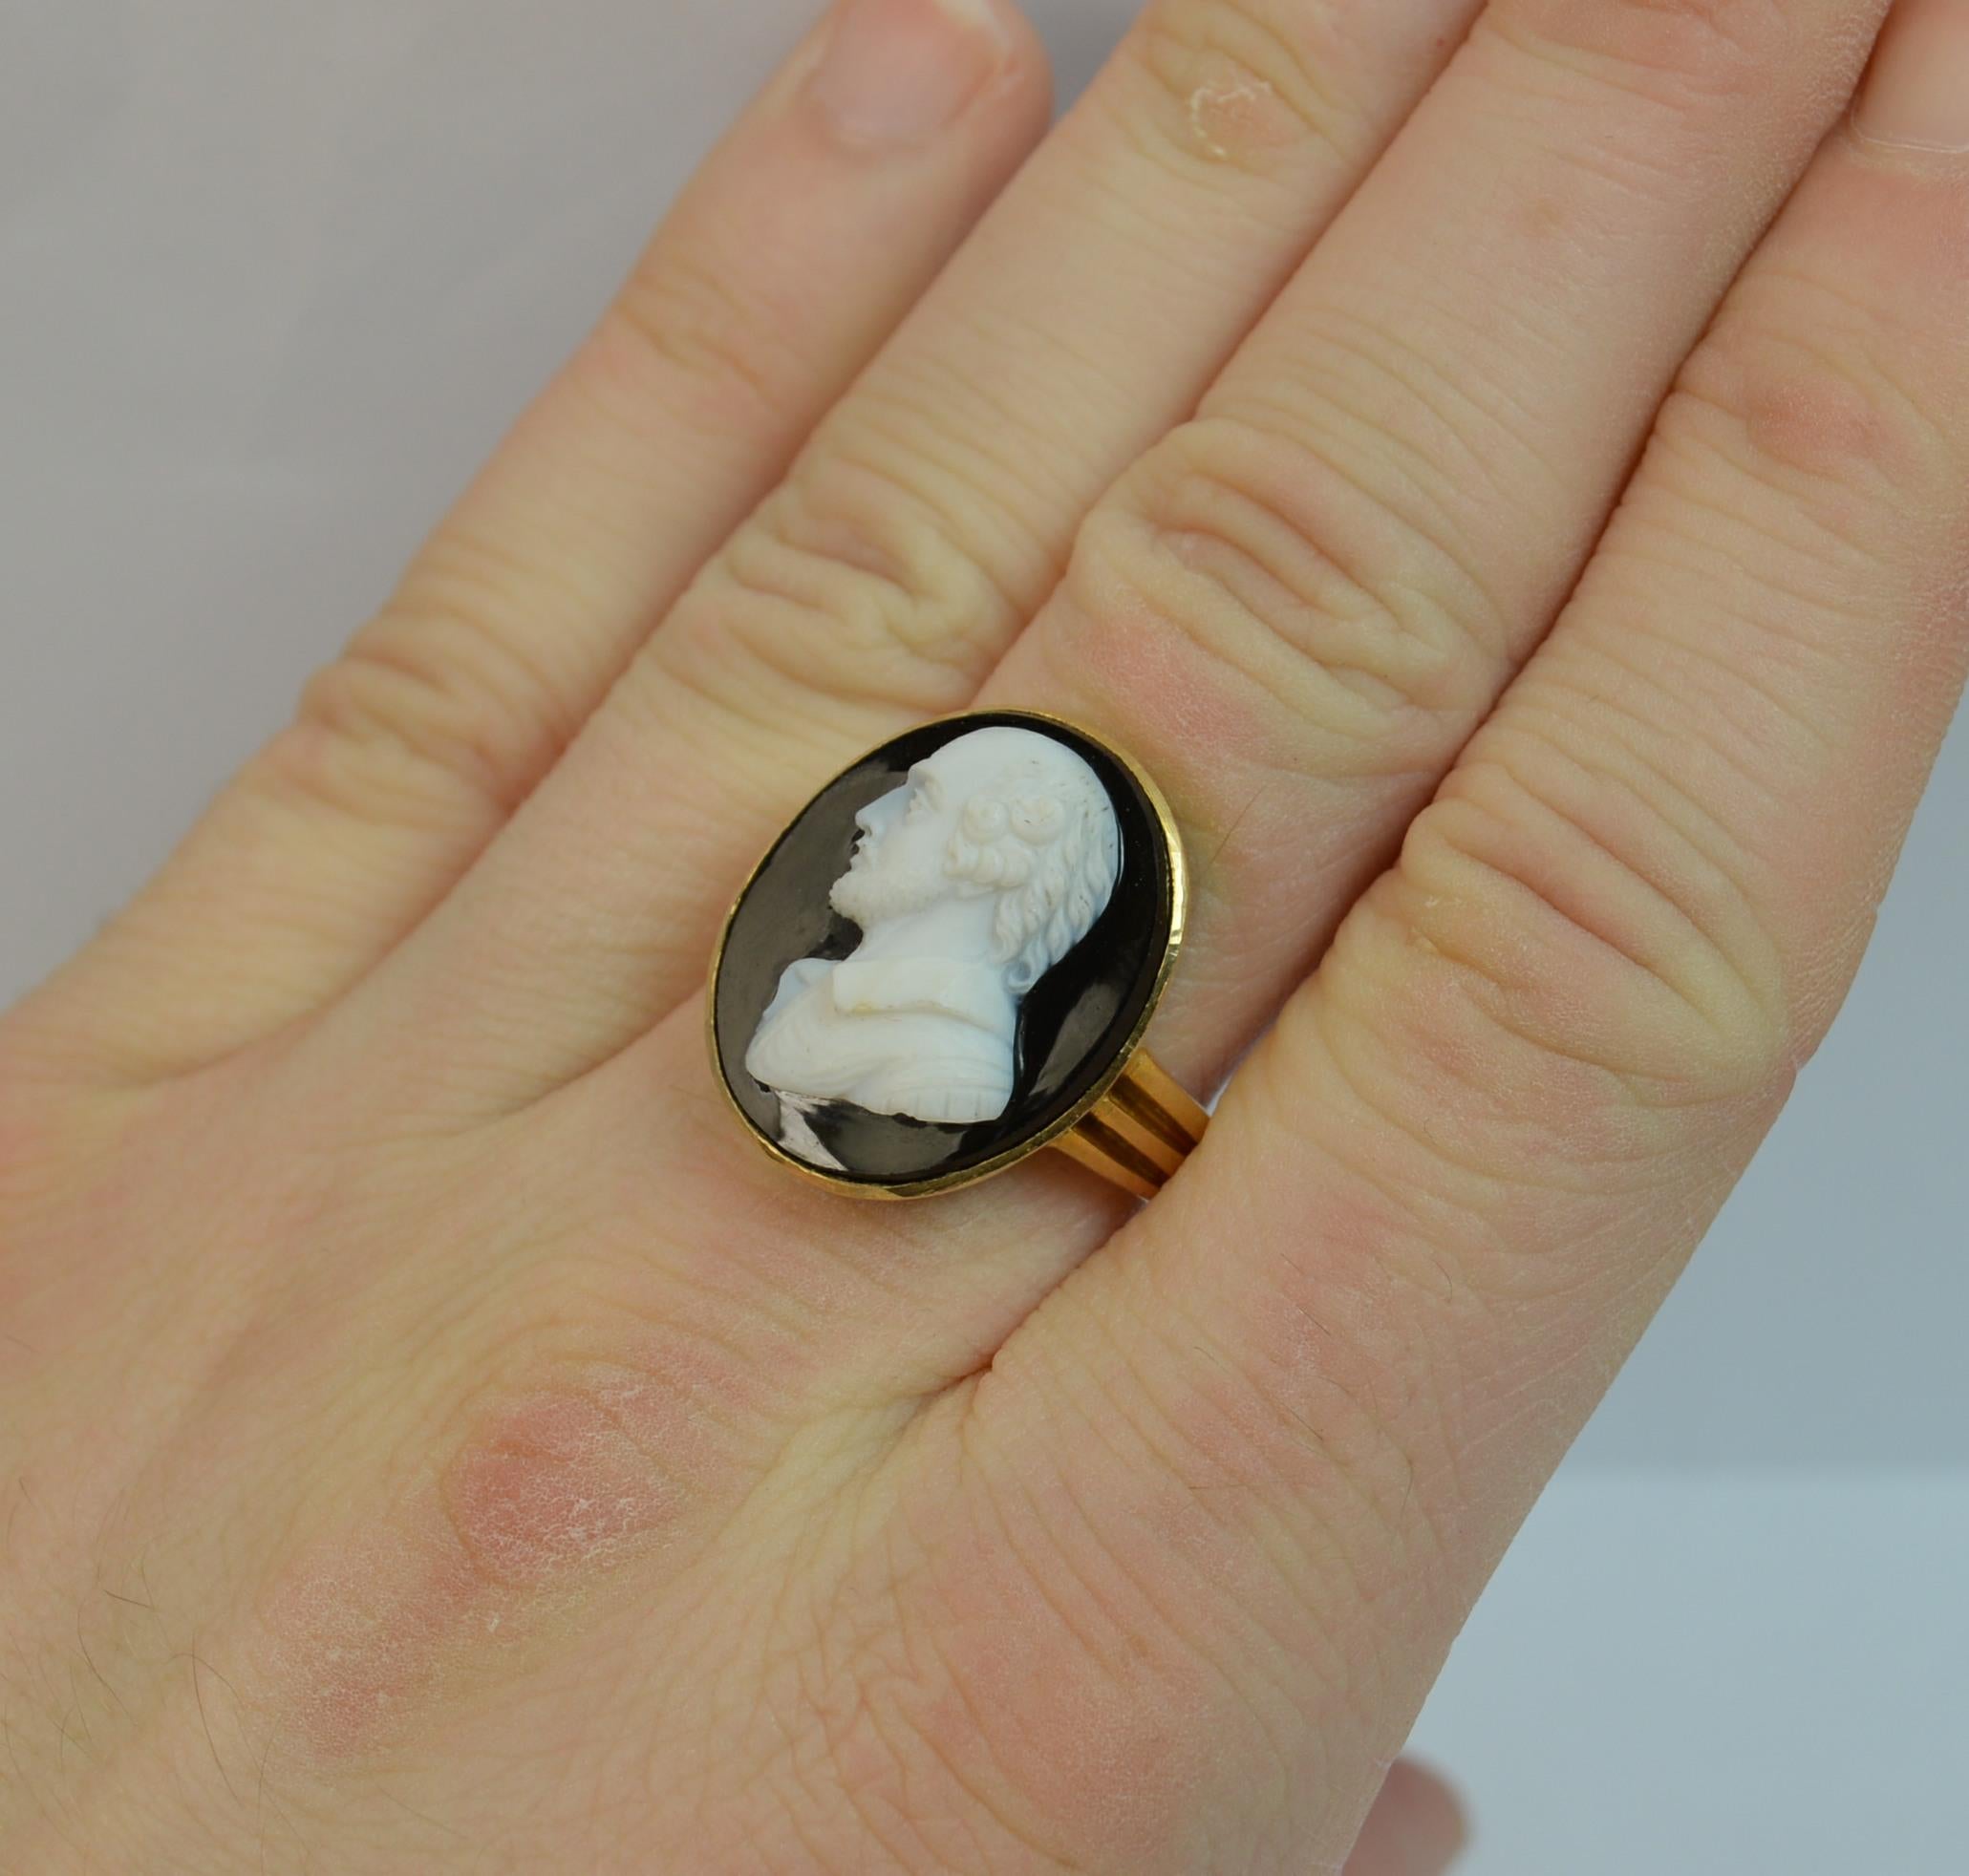 A very rare and desirable hardstone ring.

A true Victorian period example c1860.

Solid 18 carat yellow gold shank and setting.

Set with a single hardstone cameo to measure 17mm x 20mm approx which depicts a left facing bust of William